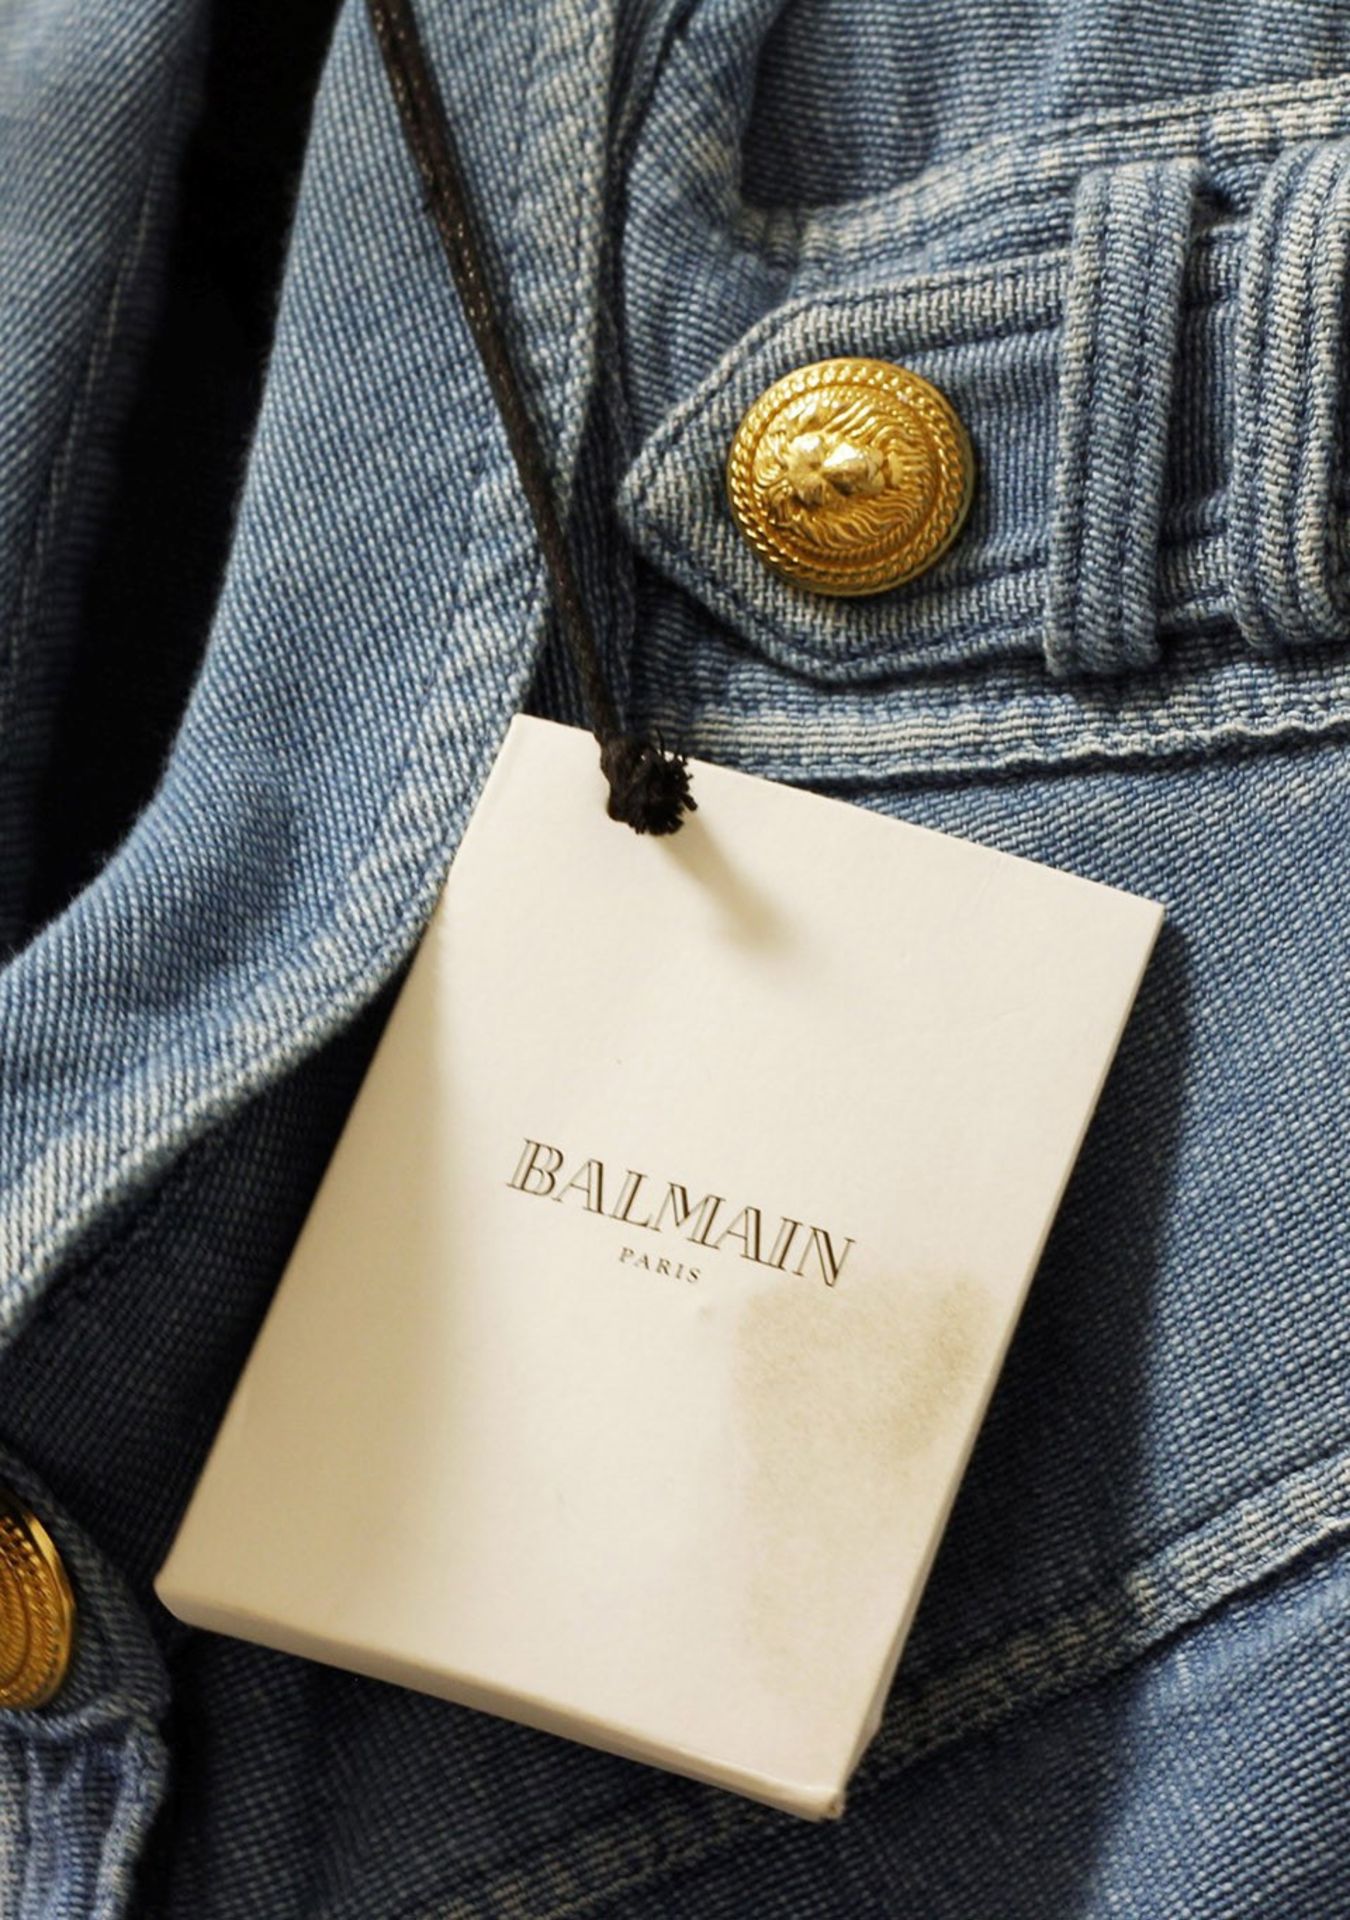 1 x Balmain Denim Dress - Size: 18 - Material: 69% Cotton, 31% Linen - From a High End Clothing - Image 3 of 10